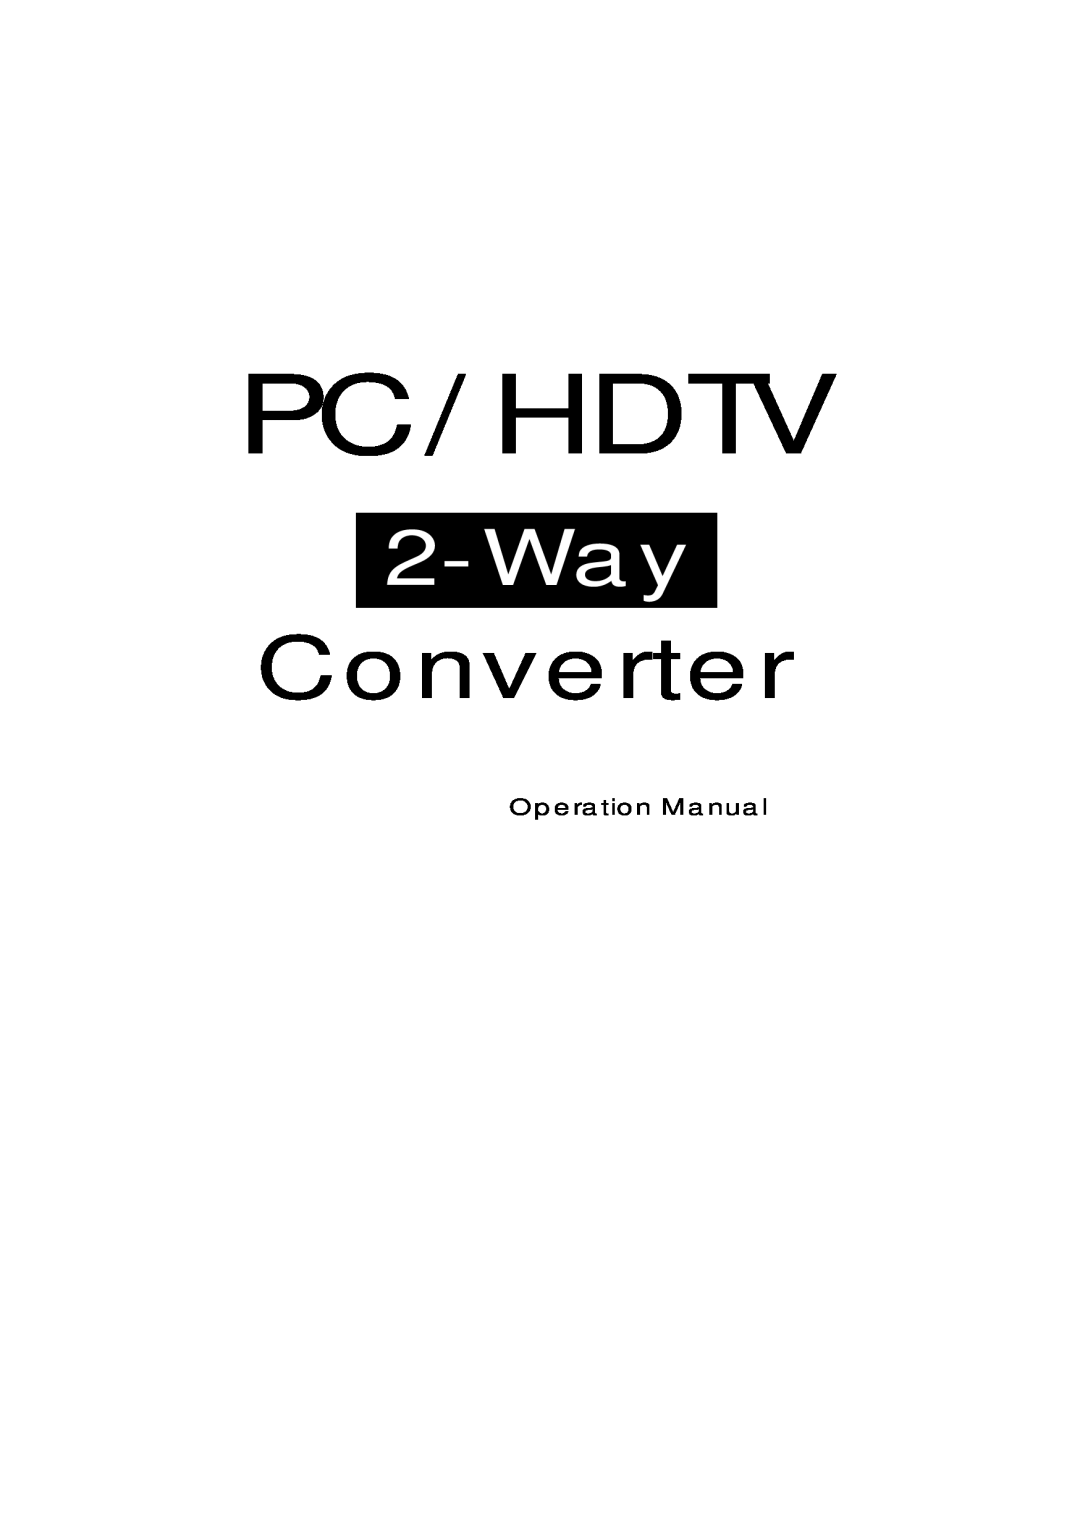 Video Products PC-HDTV-CNVTR operation manual Pc/Hdtv, Converter, 2-Way, Operation Manual 